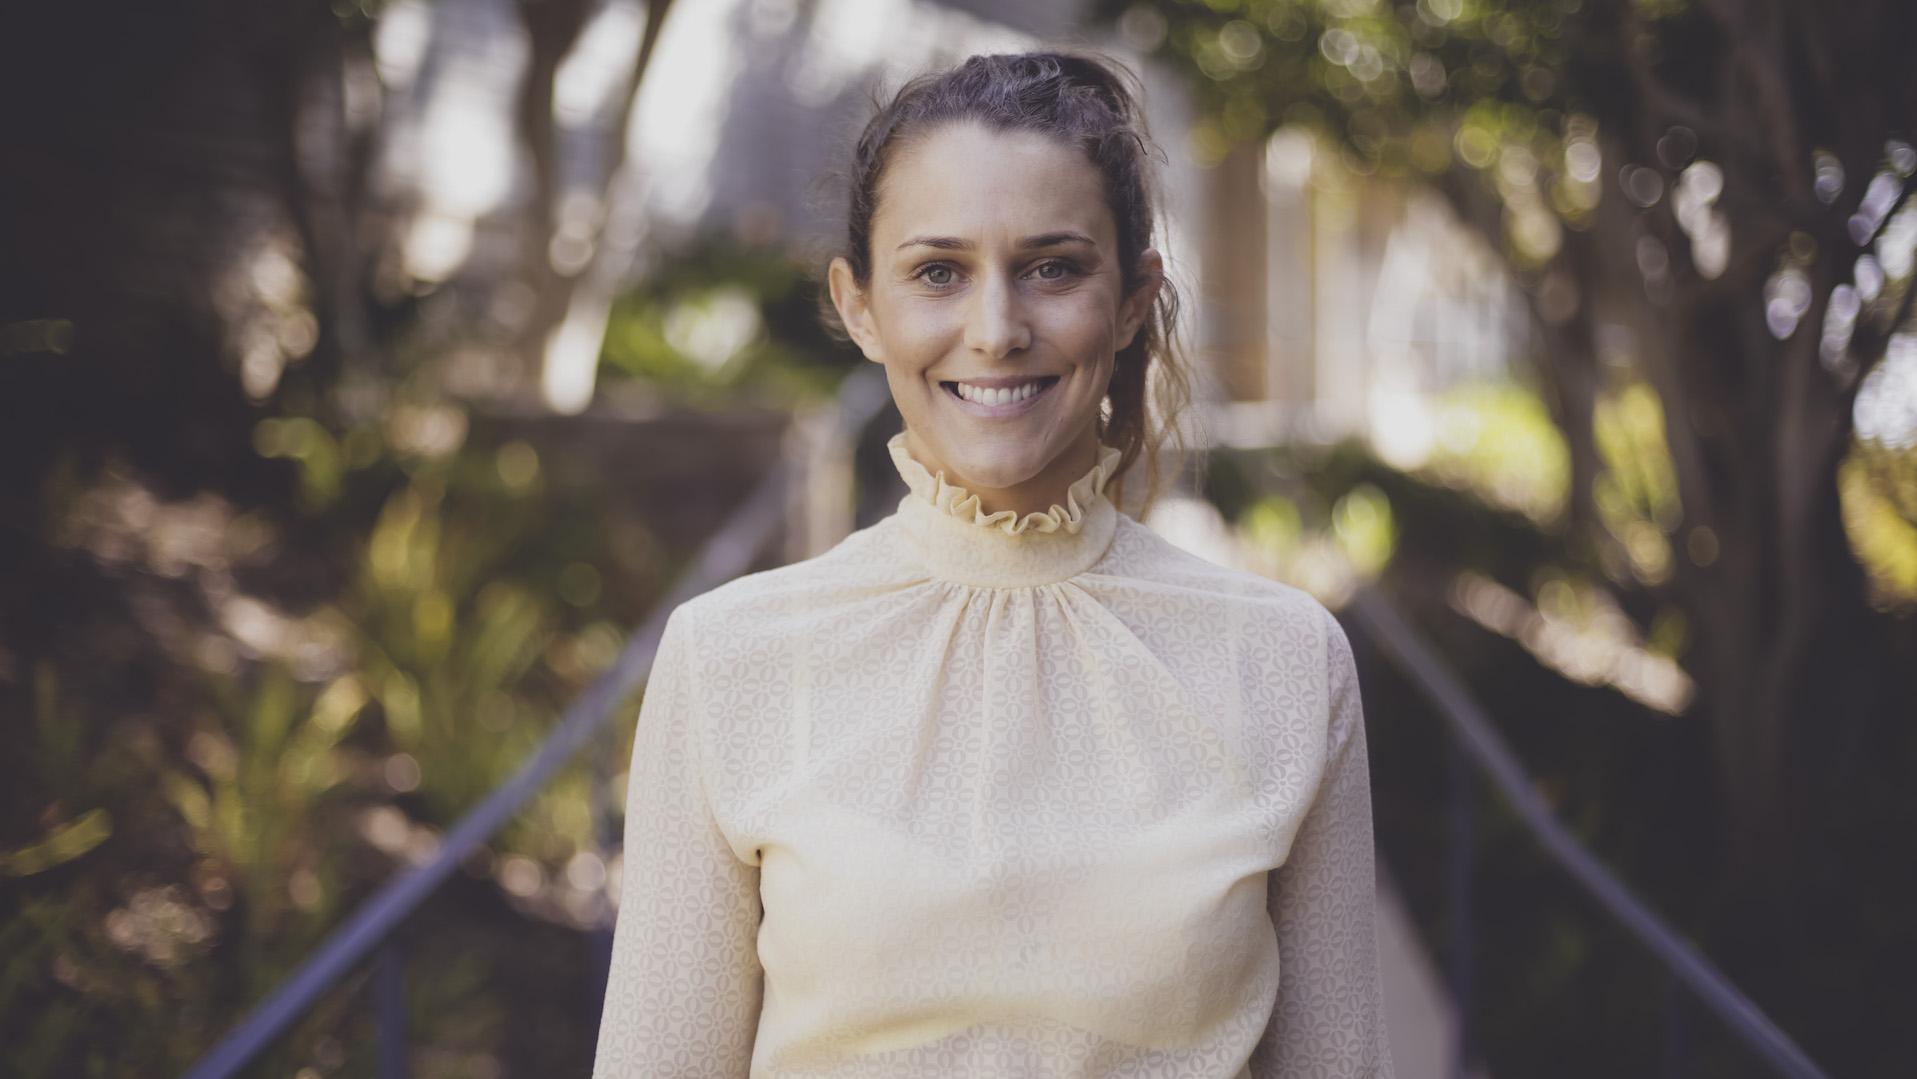 How To Financially Free Yourself With Peta Kelly